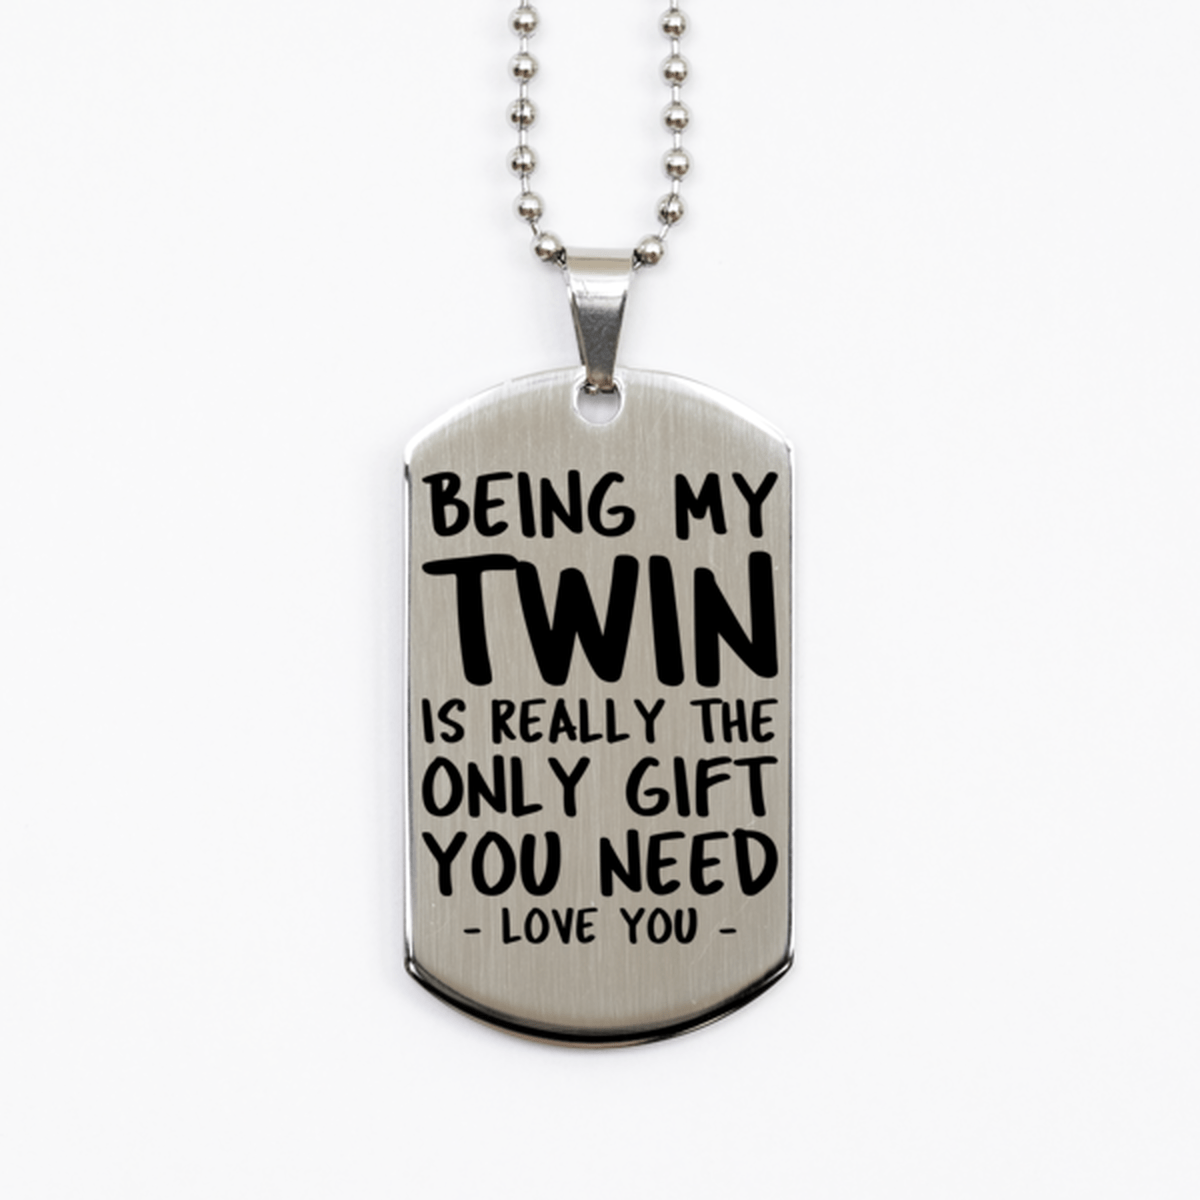 Funny Twin Silver Dog Tag Necklace, Being My Twin Is Really the Only Gift You Need, Best Birthday Gifts for Twin